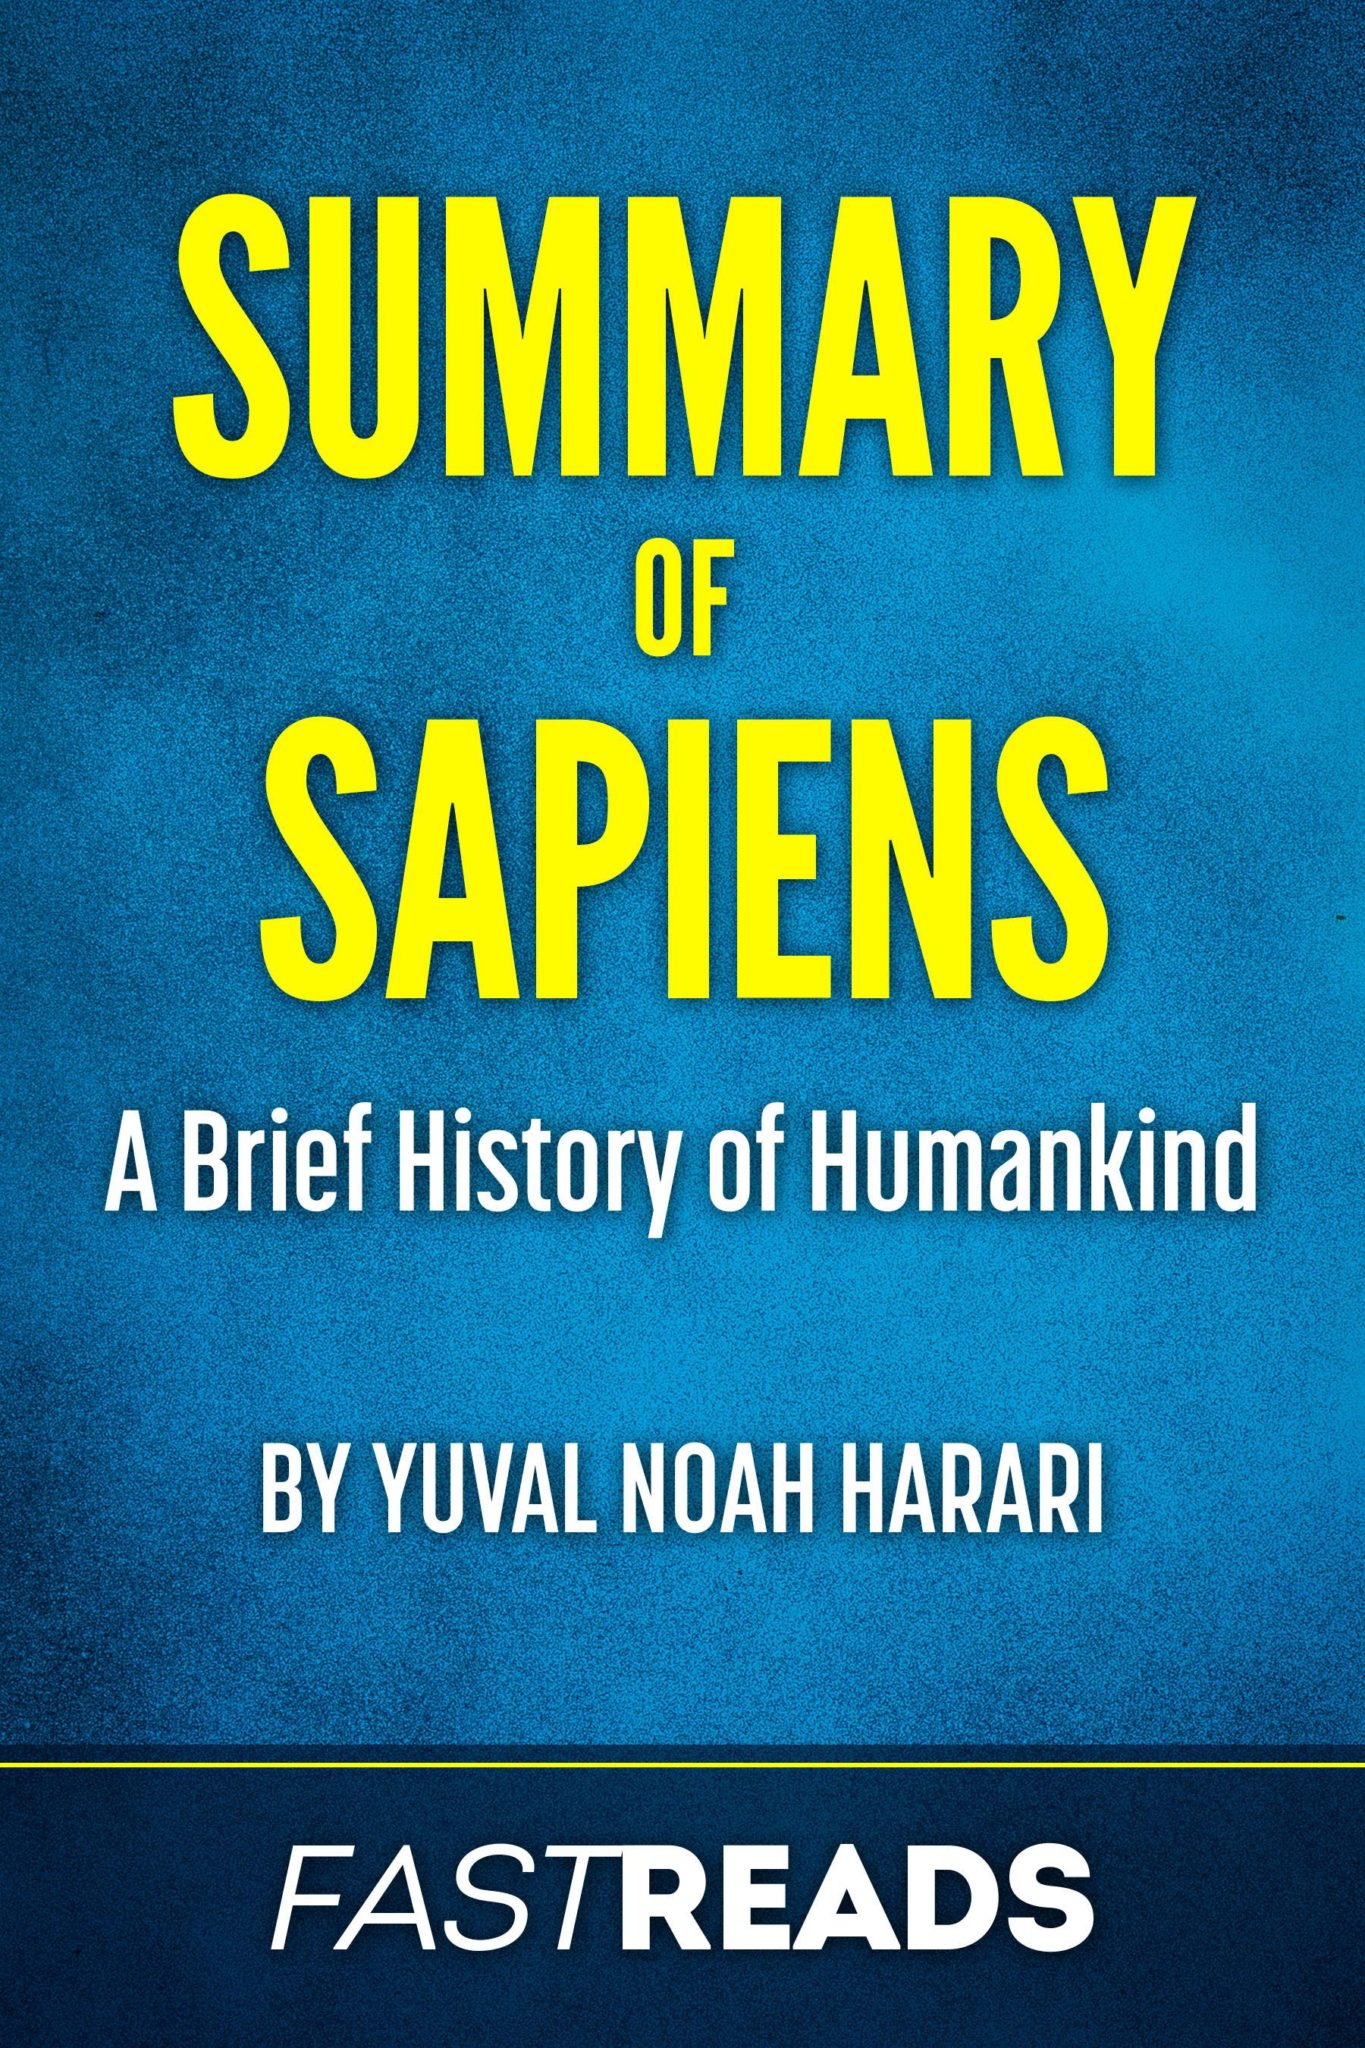 FREE: Summary of Sapiens by Yuval Noah Harari by FastReads